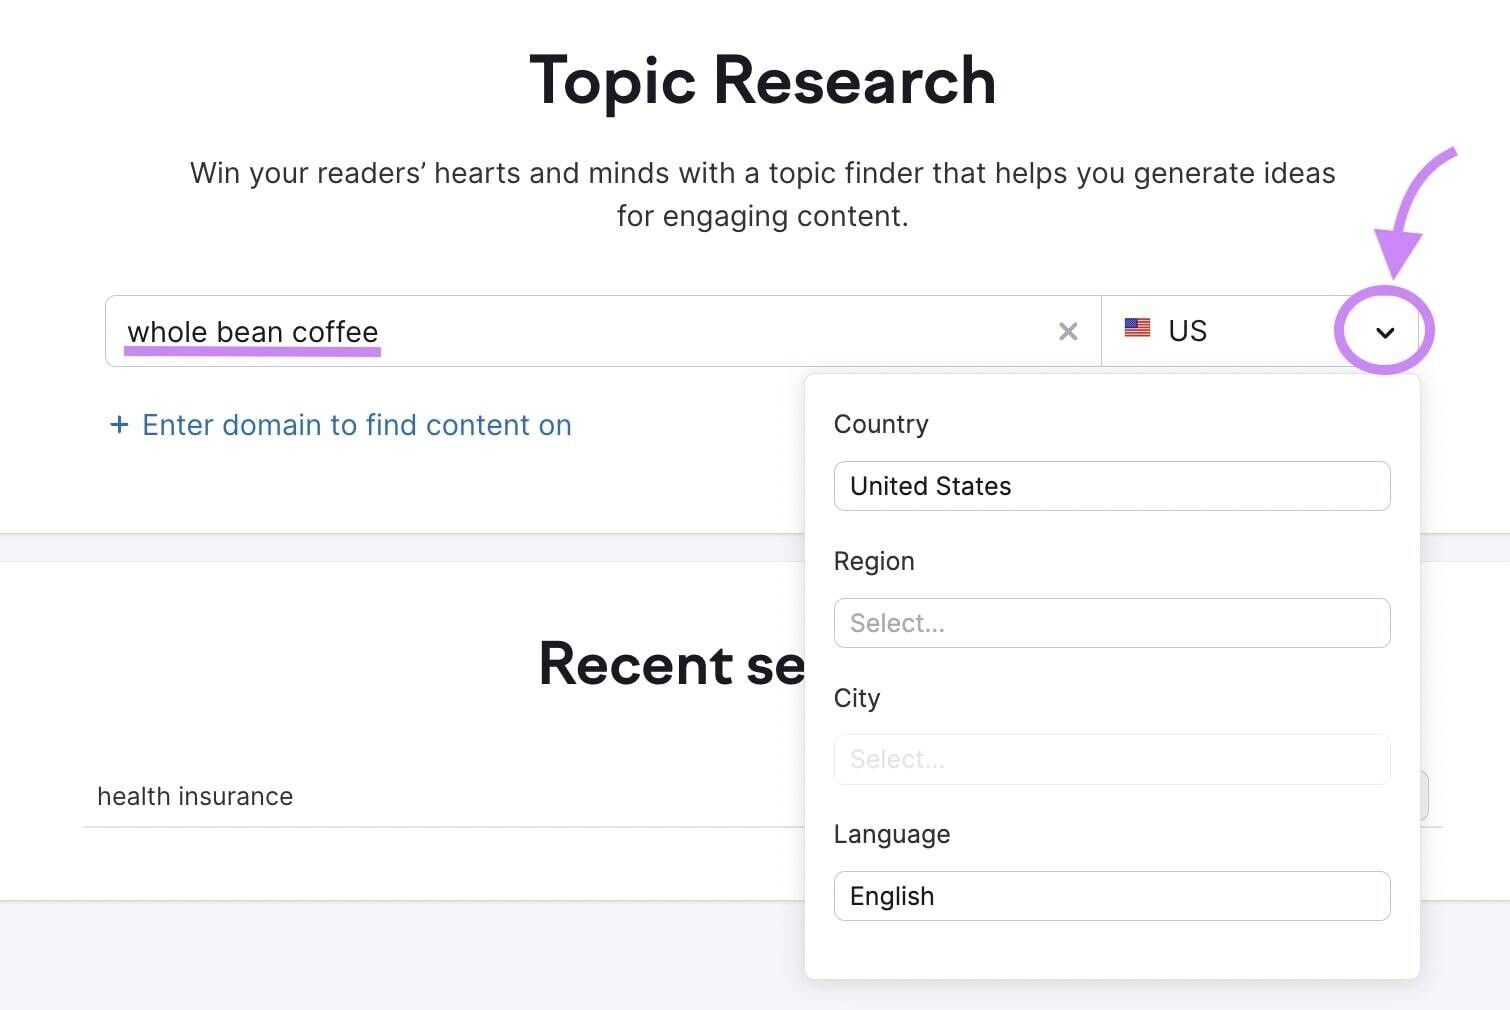 Searching for “whole bean coffee” in the US with Topic Research tool